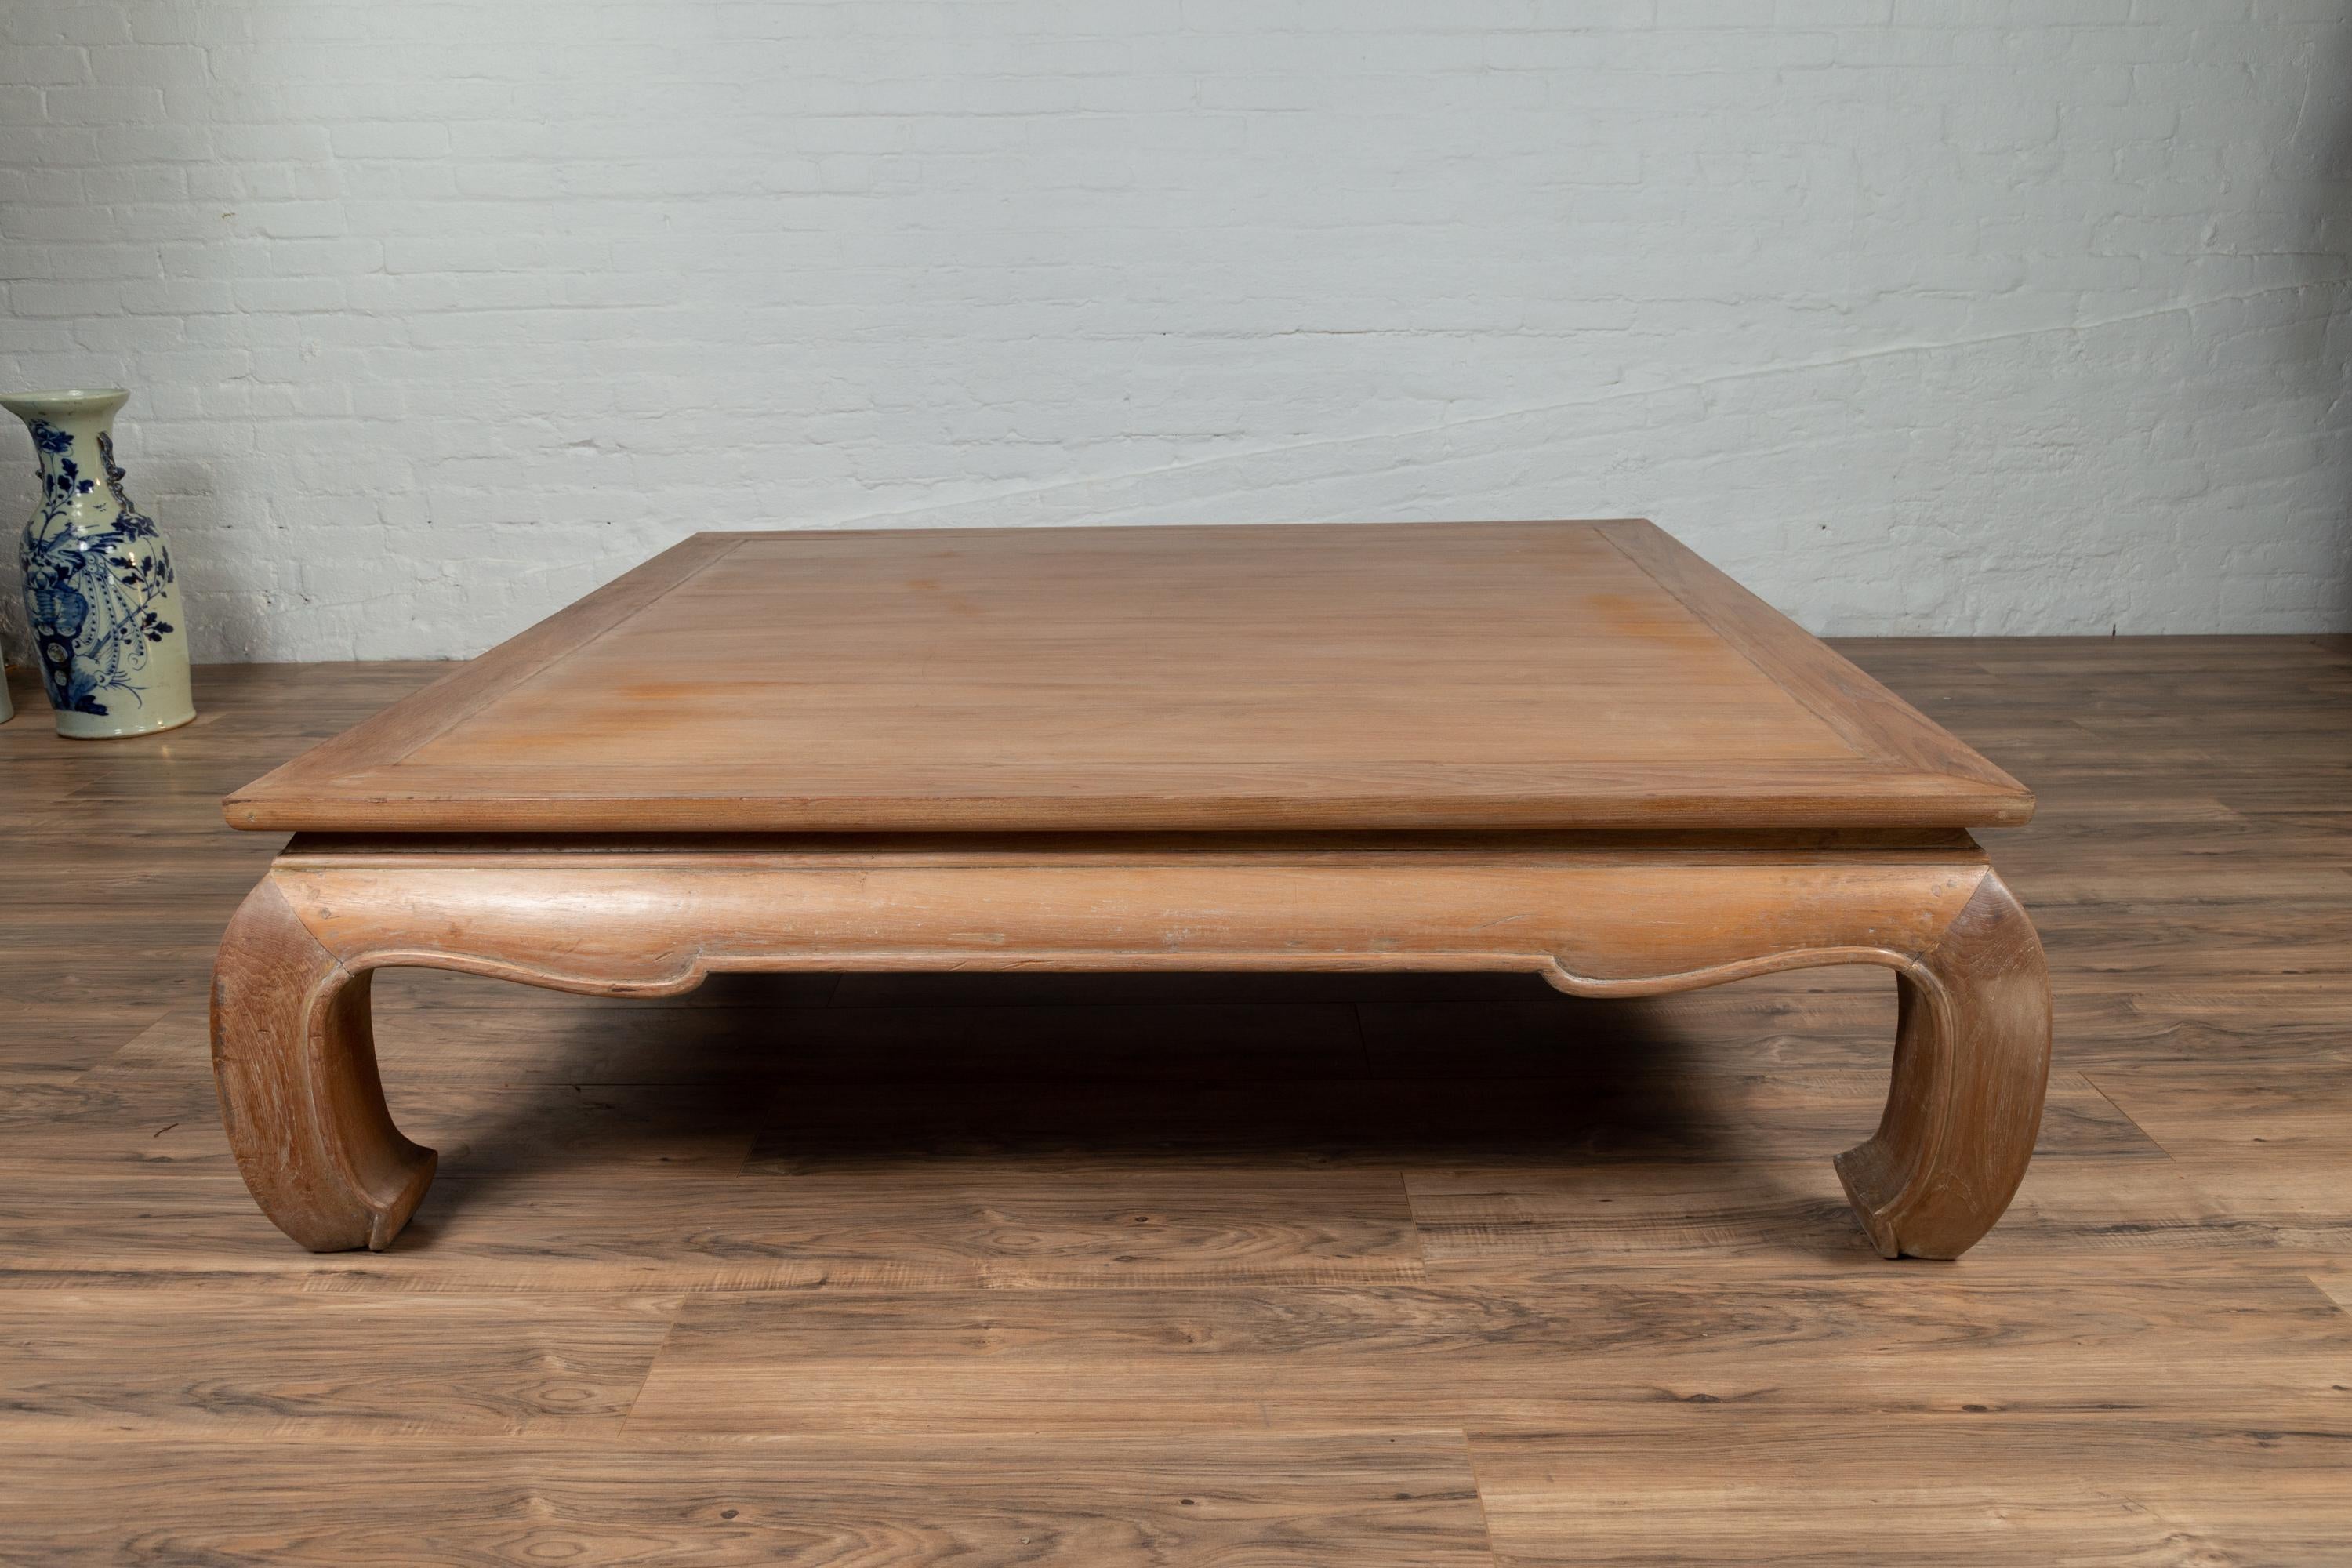 Chinese Antique Coffee Table with Natural Patina, Bulging Legs and Waisted Apron 1